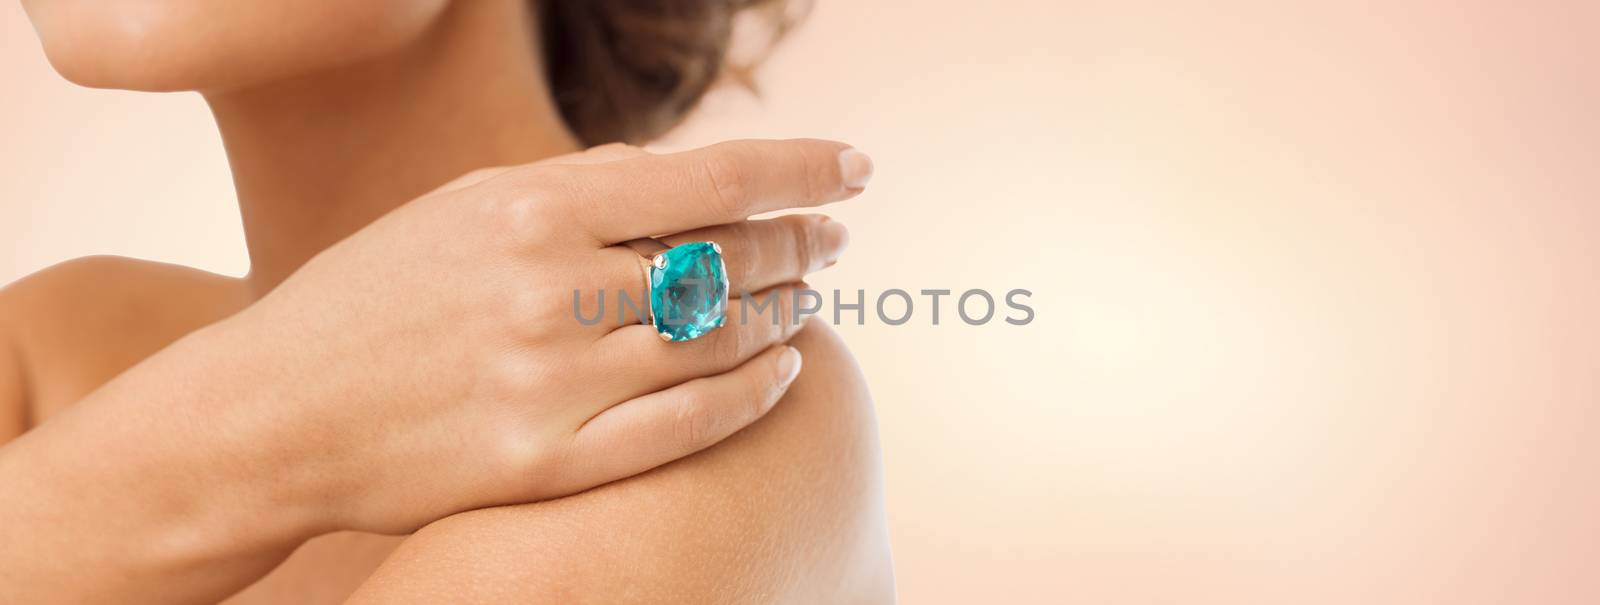 close up of woman with cocktail ring on hand by dolgachov